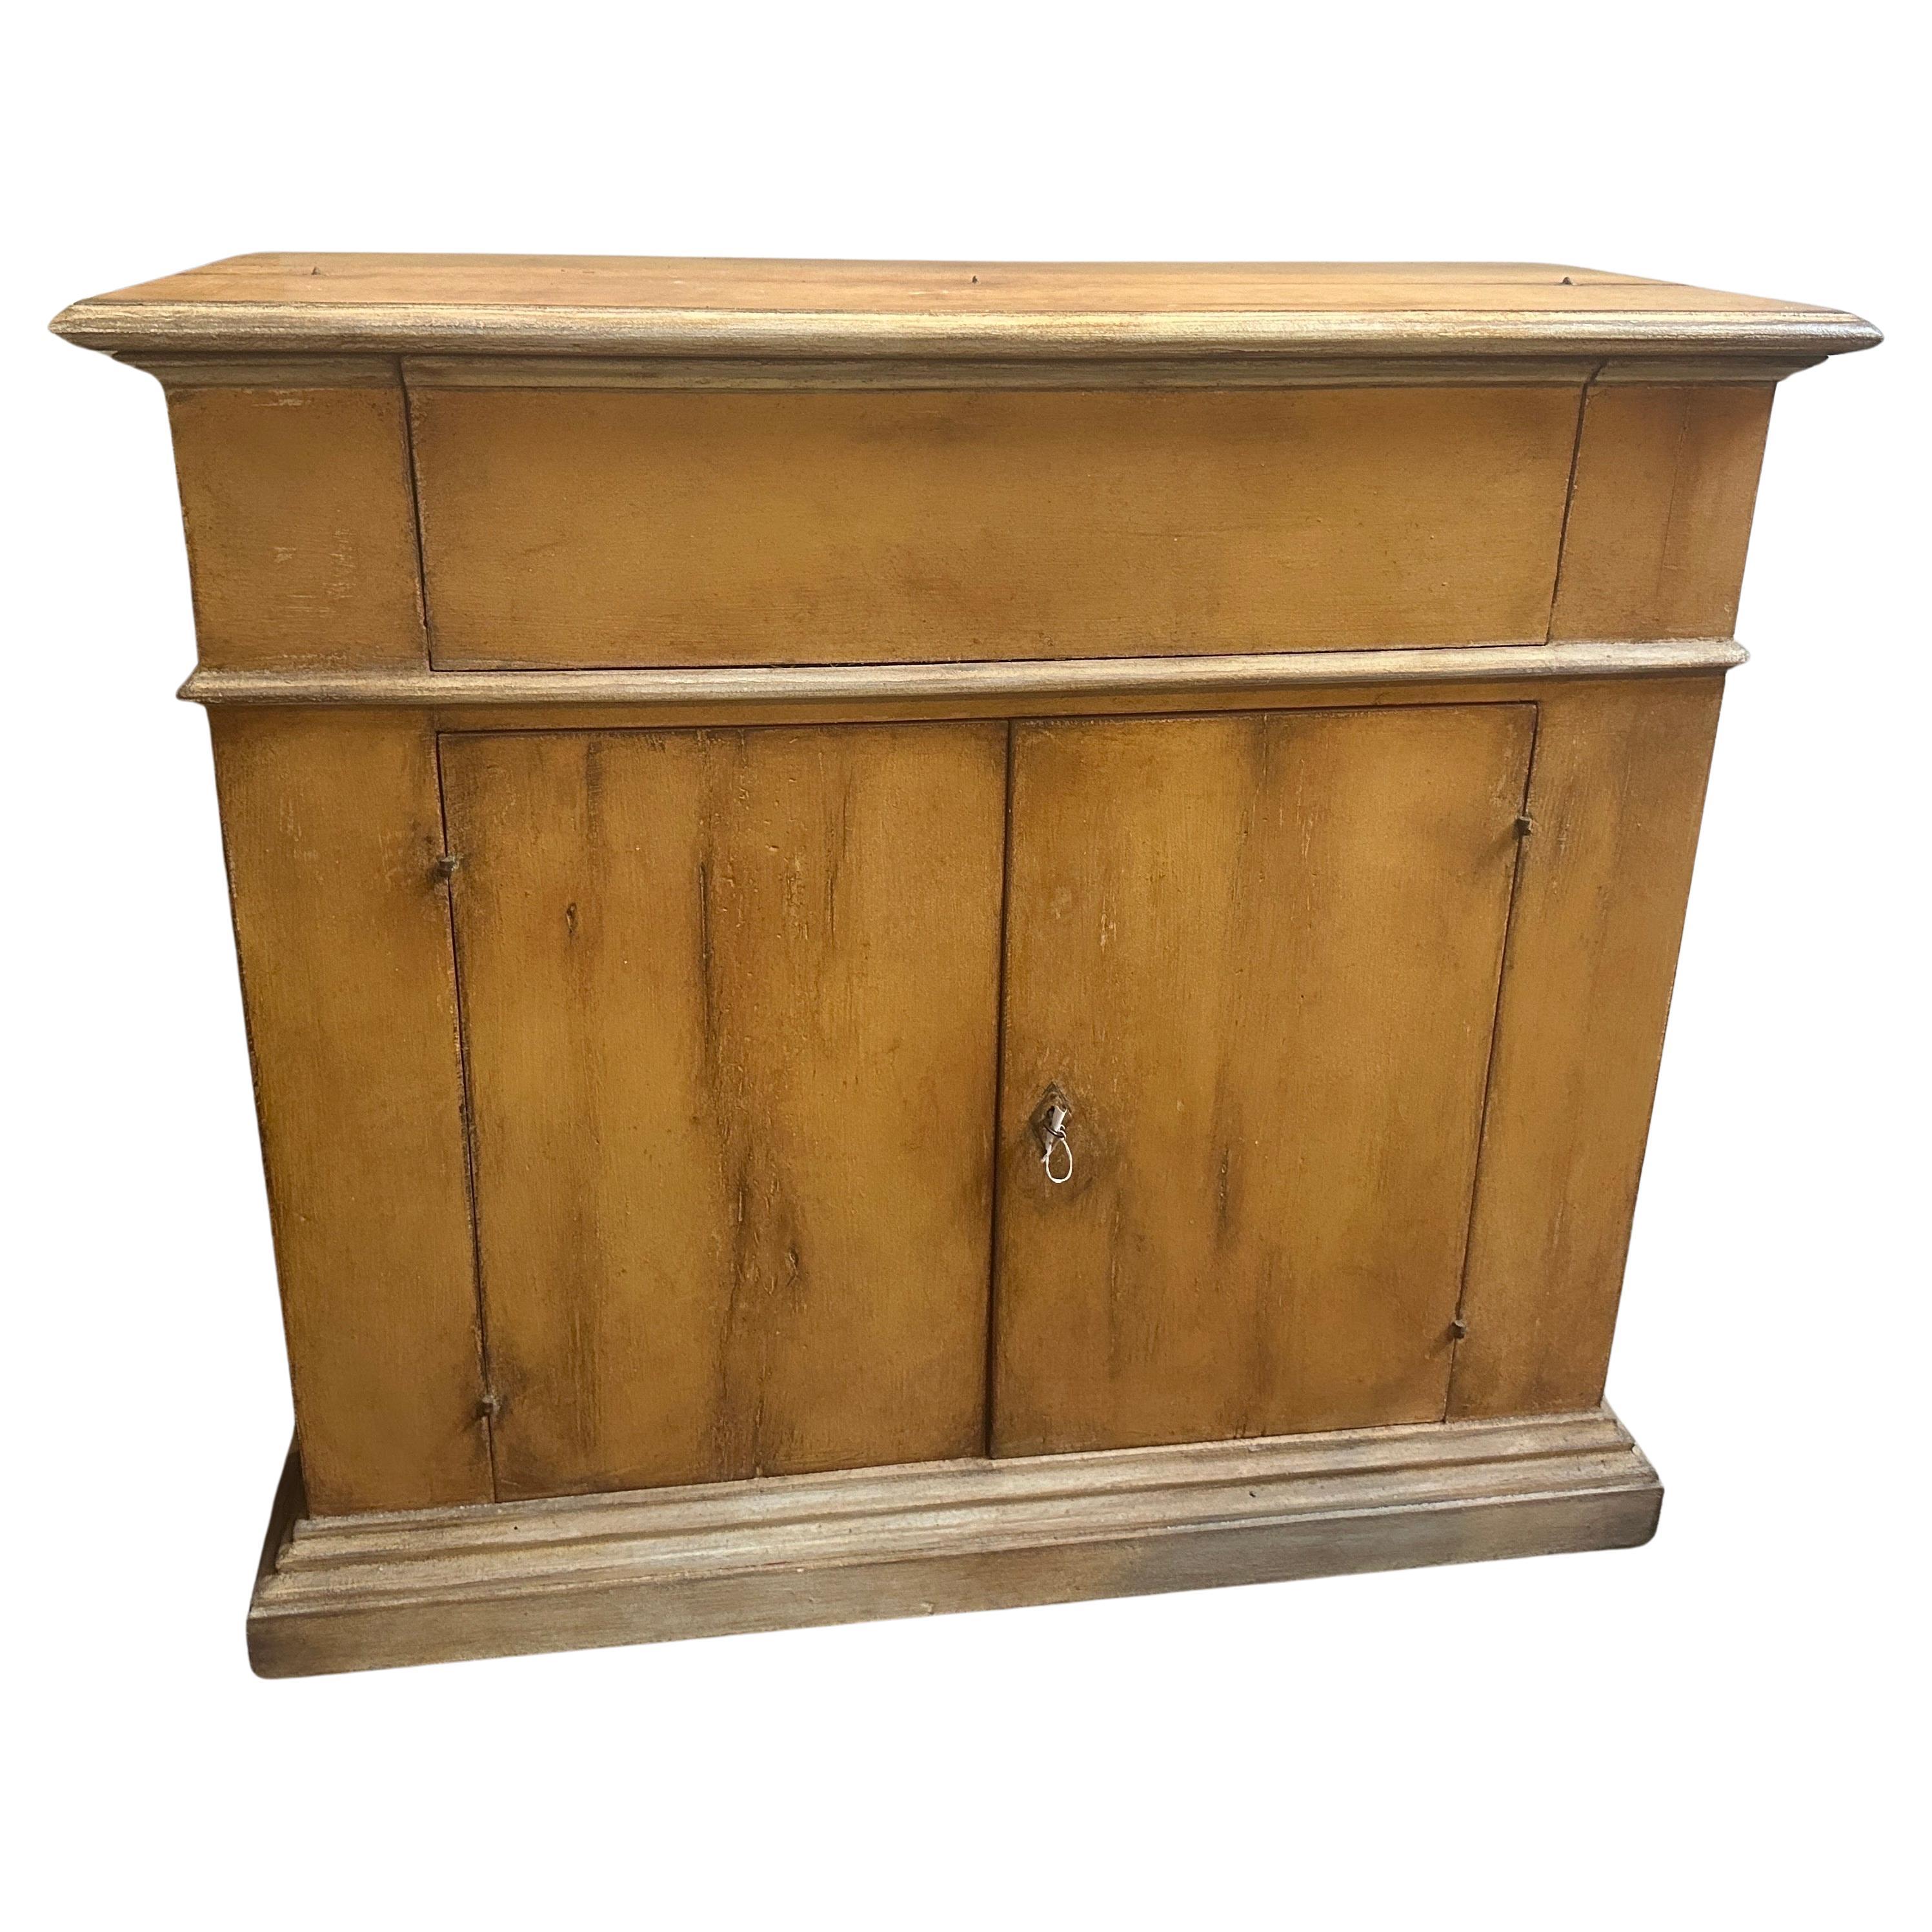 This Orange and brown Lacquered Italian Secretaire serves as both a functional and aesthetically pleasing piece, showcasing the design sensibilities of its era with a bold and distinctive color choice. It's in good conditions with normal signs of